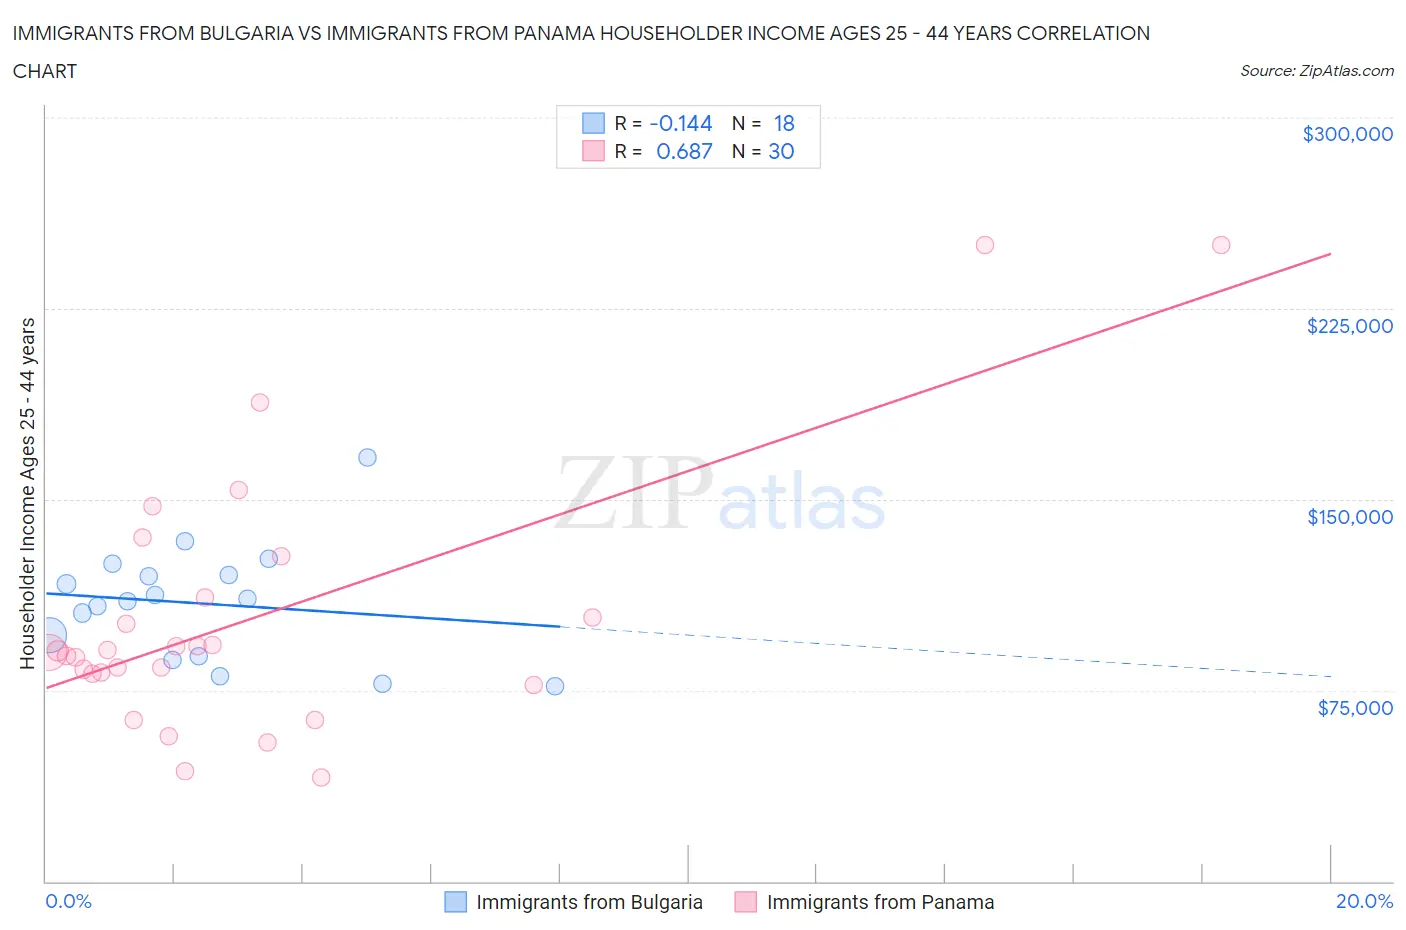 Immigrants from Bulgaria vs Immigrants from Panama Householder Income Ages 25 - 44 years